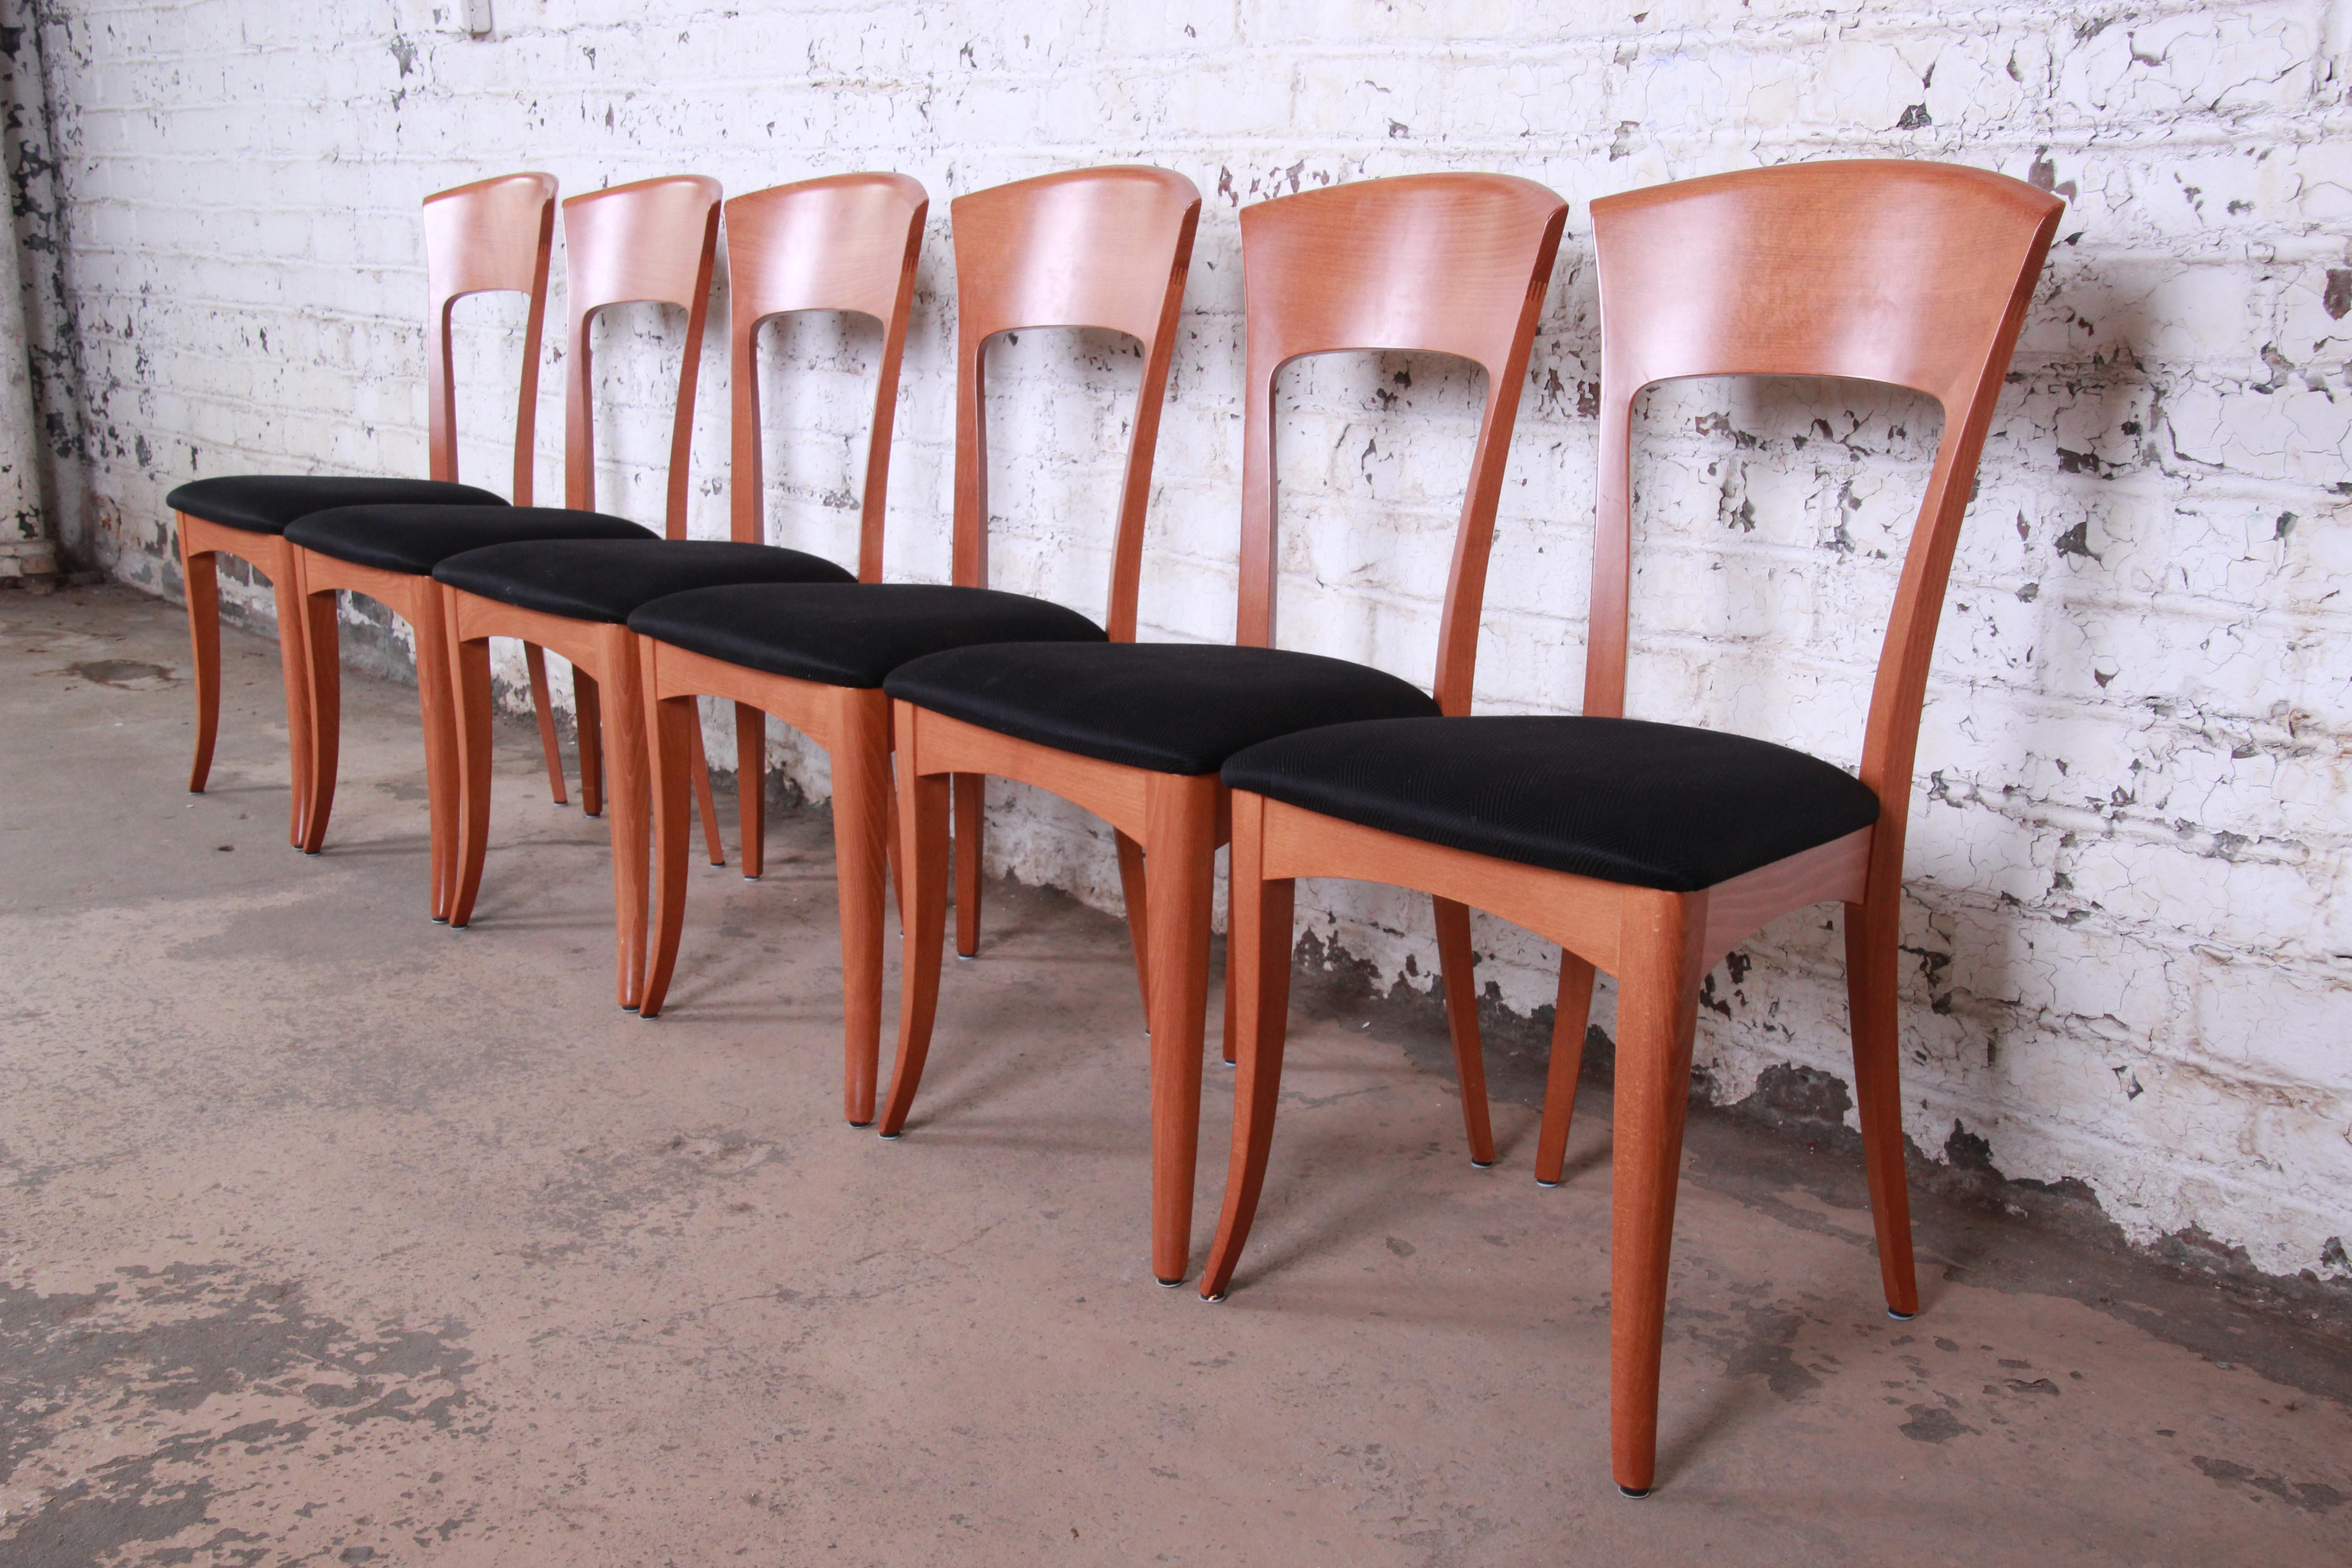 A gorgeous set of six sculpted teak Italian dining chairs by A. Sibau. The chairs feature solid teak frames with beautiful wood grain and sleek mid-century modern design. Black upholstery is original. Each chair is signed. The chairs are solid and